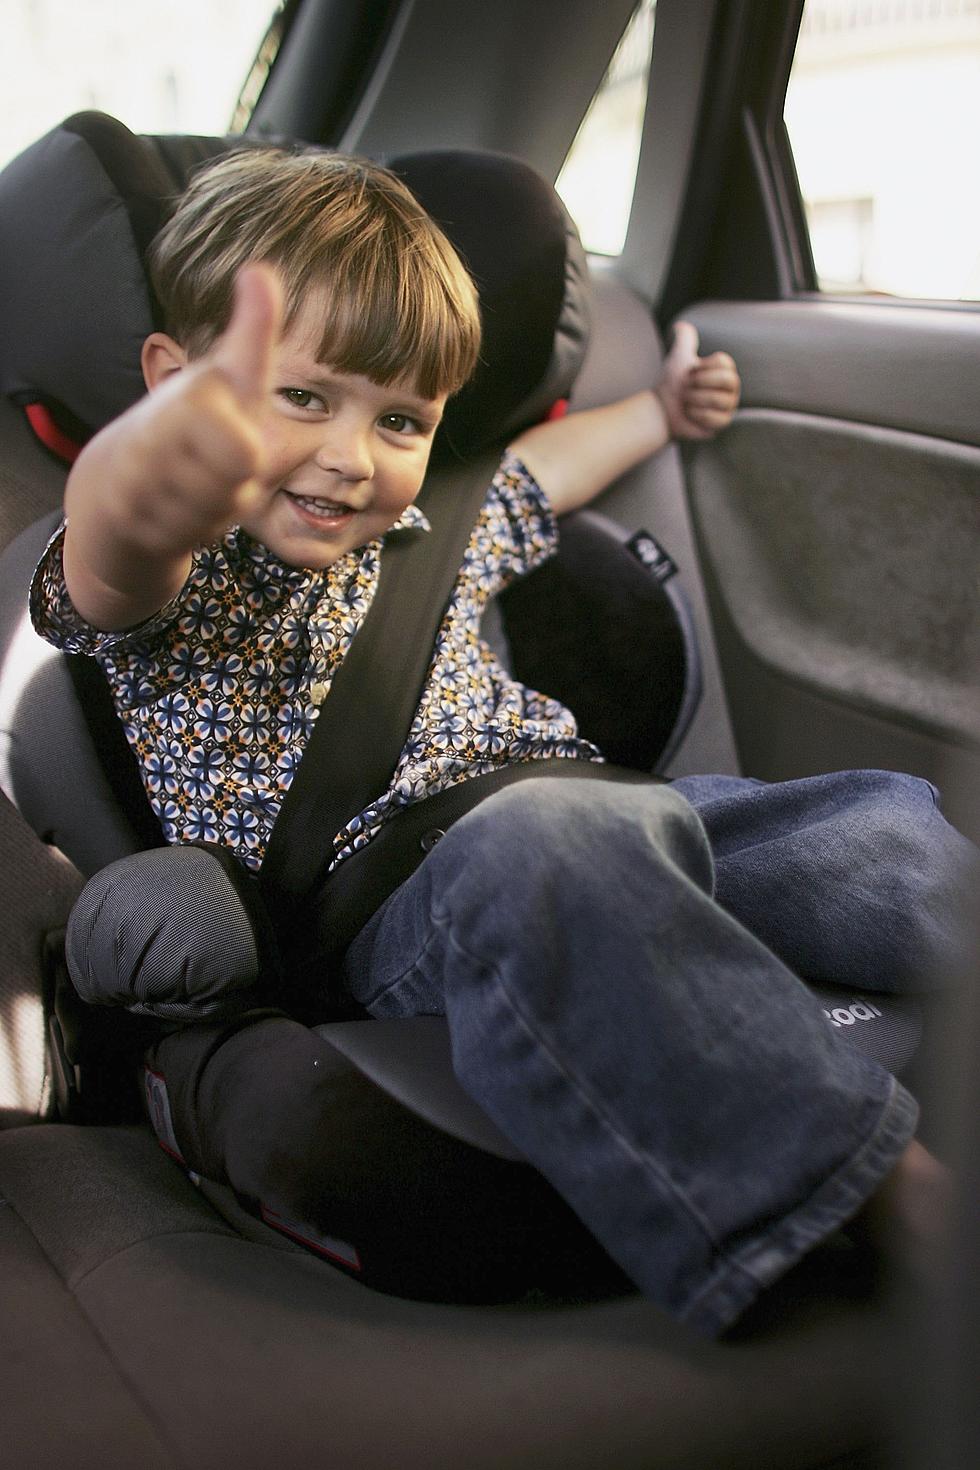 Walmart Wants to Give you $30 for Your Old Car Seat